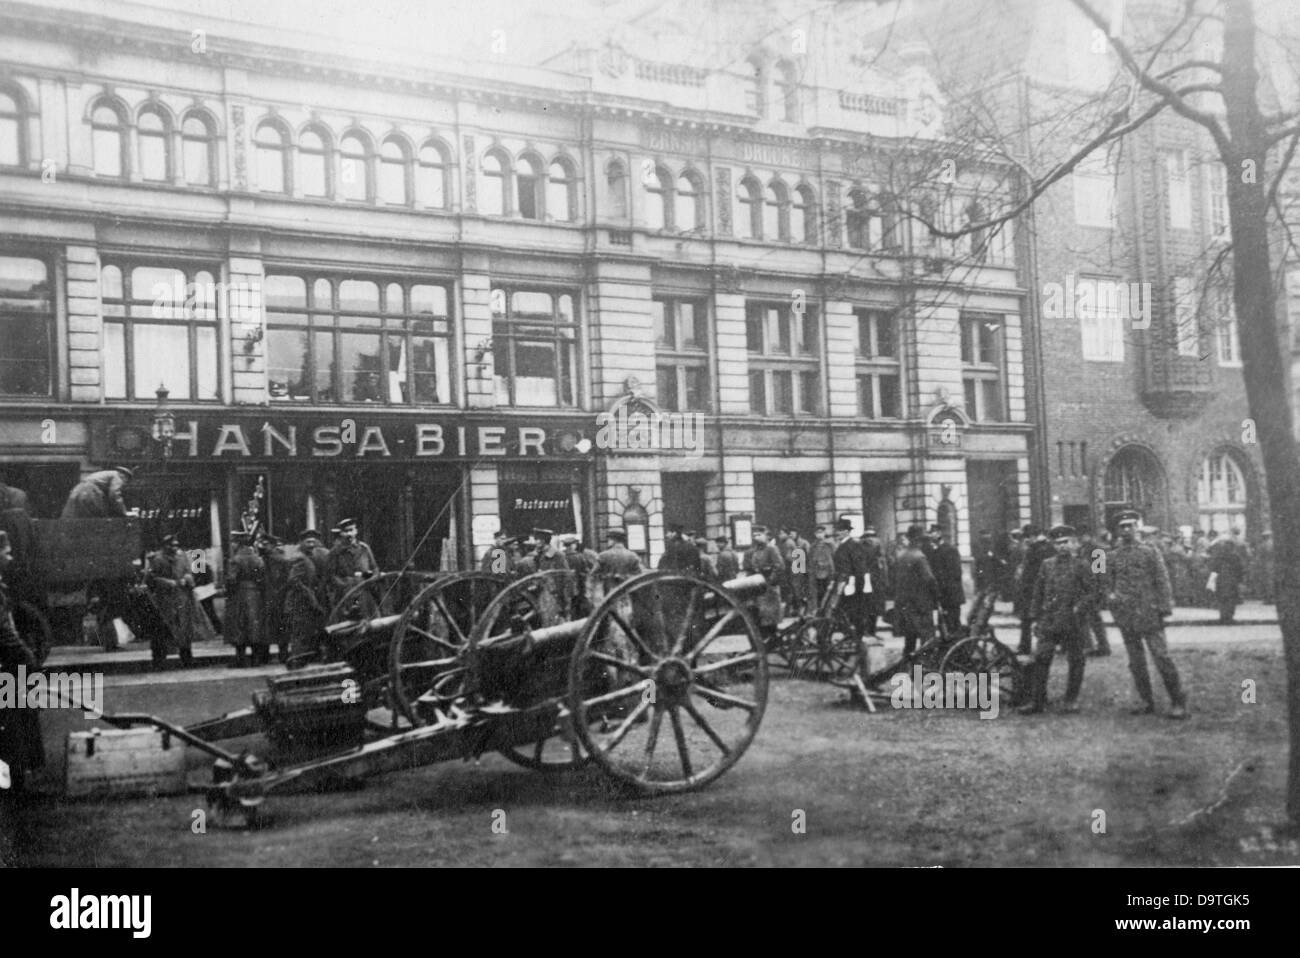 German troops and guns are pictured in the streets of St. Pauli in Hamburg, Germany, in early 1918. German civilians suffered from poor food supply and bad working conditions during World War I, which led to mass strikes and demonstrations in January 1918, which were supressed by the government with violent means. Photo: Berliner Verlag/Archiv Stock Photo